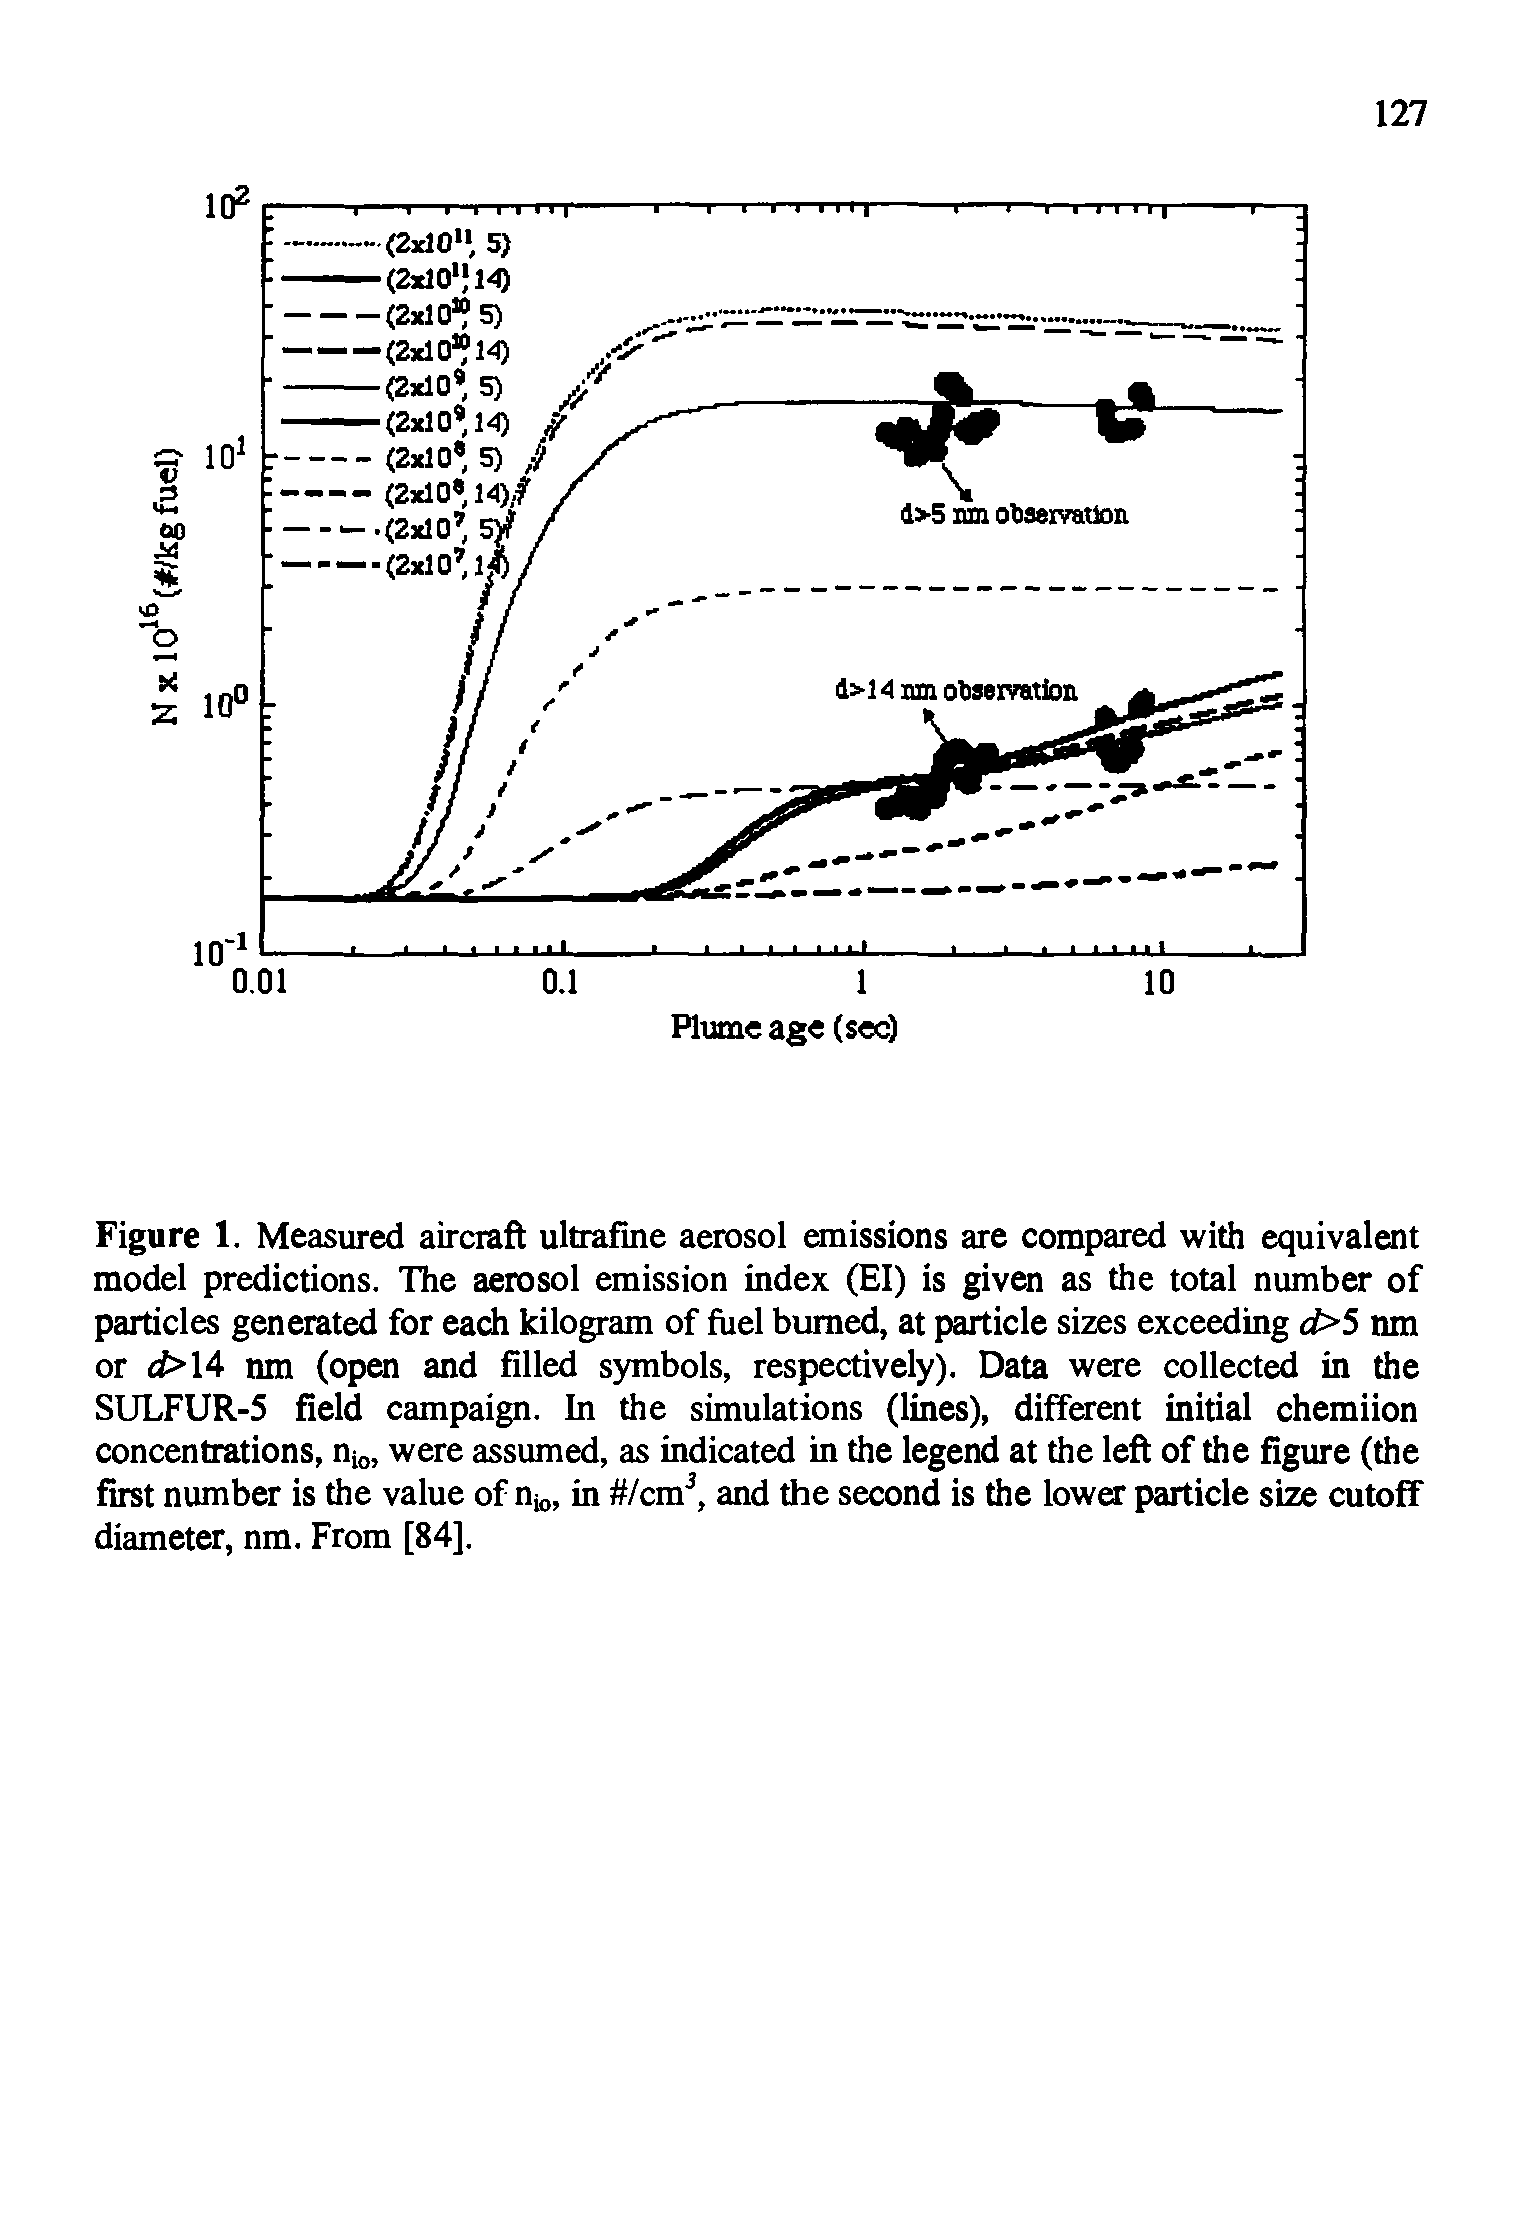 Figure 1. Measured aircraft ultrafine aerosol emissions are compared with equivalent model predictions. The aerosol emission index (El) is given as the total number of particles generated for each kilogram of fuel burned, at particle sizes exceeding d>5 nm or d> 14 nm (open and filled symbols, respectively). Data were collected in the SULFUR-5 field campaign. In the simulations (lines), different initial chemiion concentrations, nio, were assumed, as indicated in the legend at the left of the figure (the first number is the value of n in /cmJ, and the second is the lower particle size cutoff diameter, nm. From [84],...